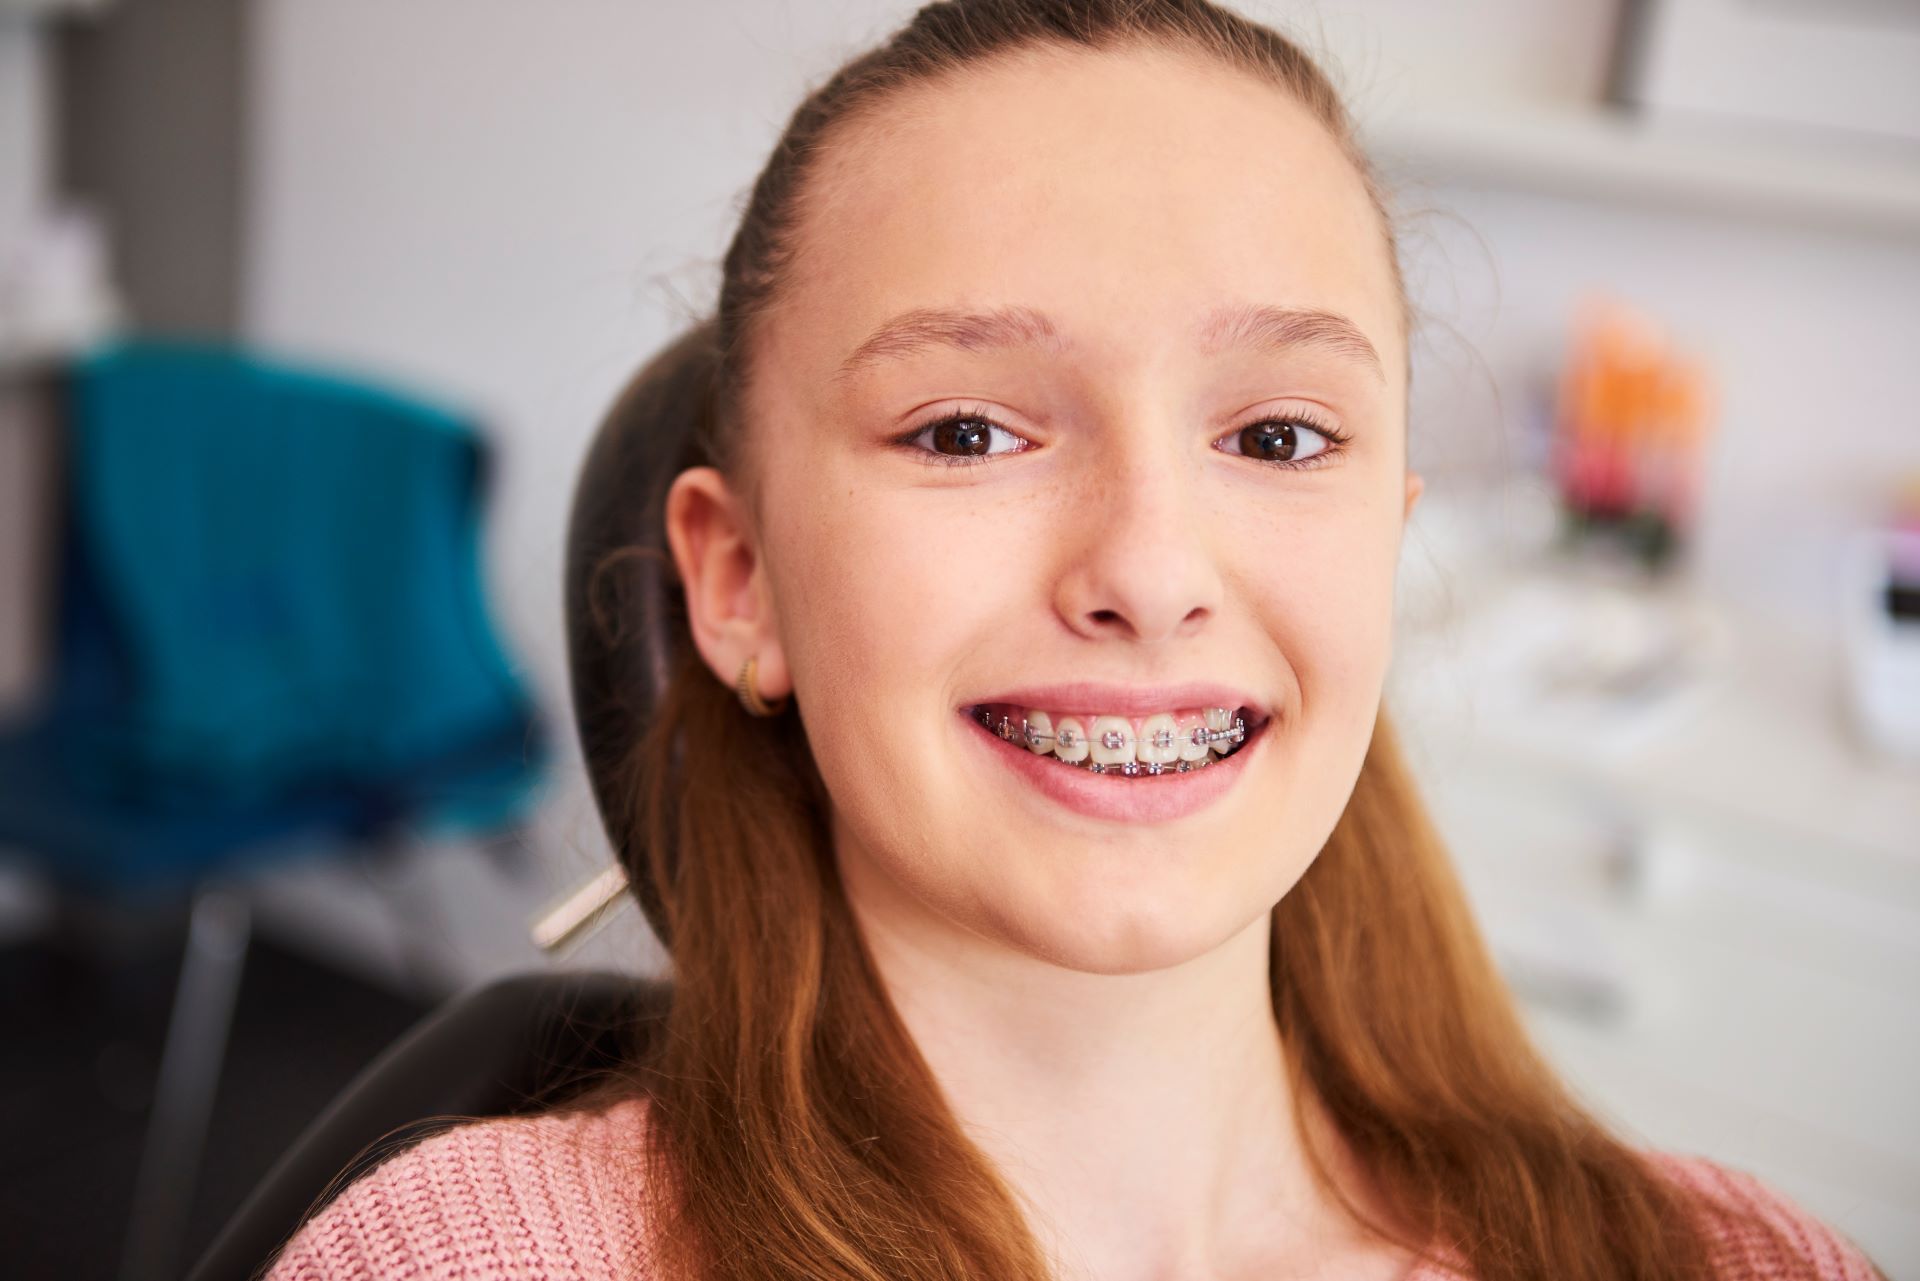 girl with braces smiling at dentist